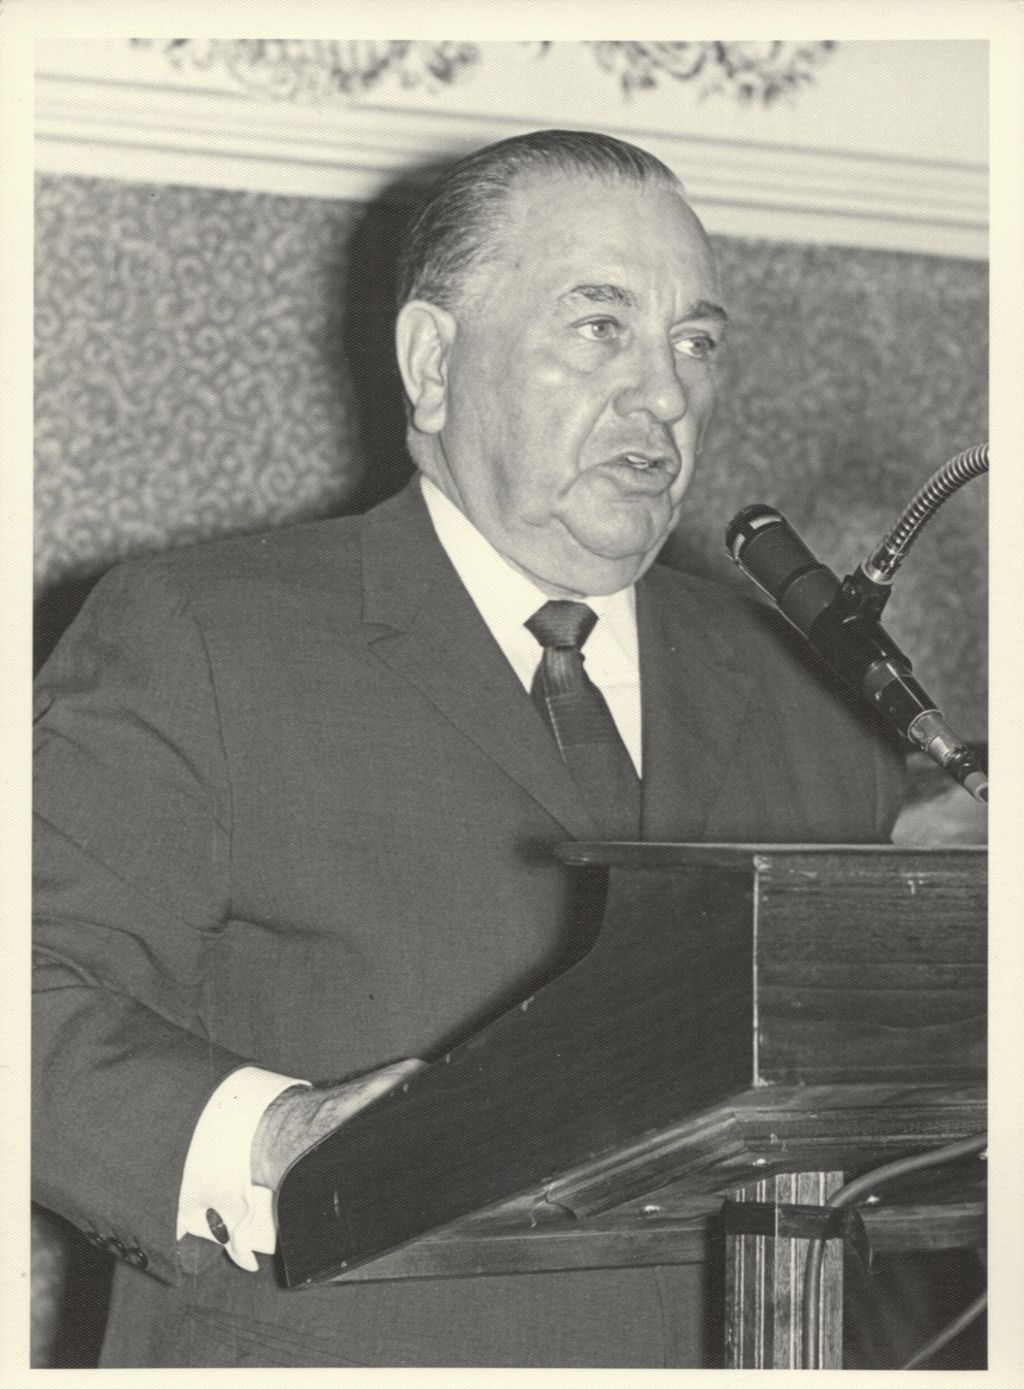 Miniature of Richard J. Daley speaking at the Sherman House Hotel